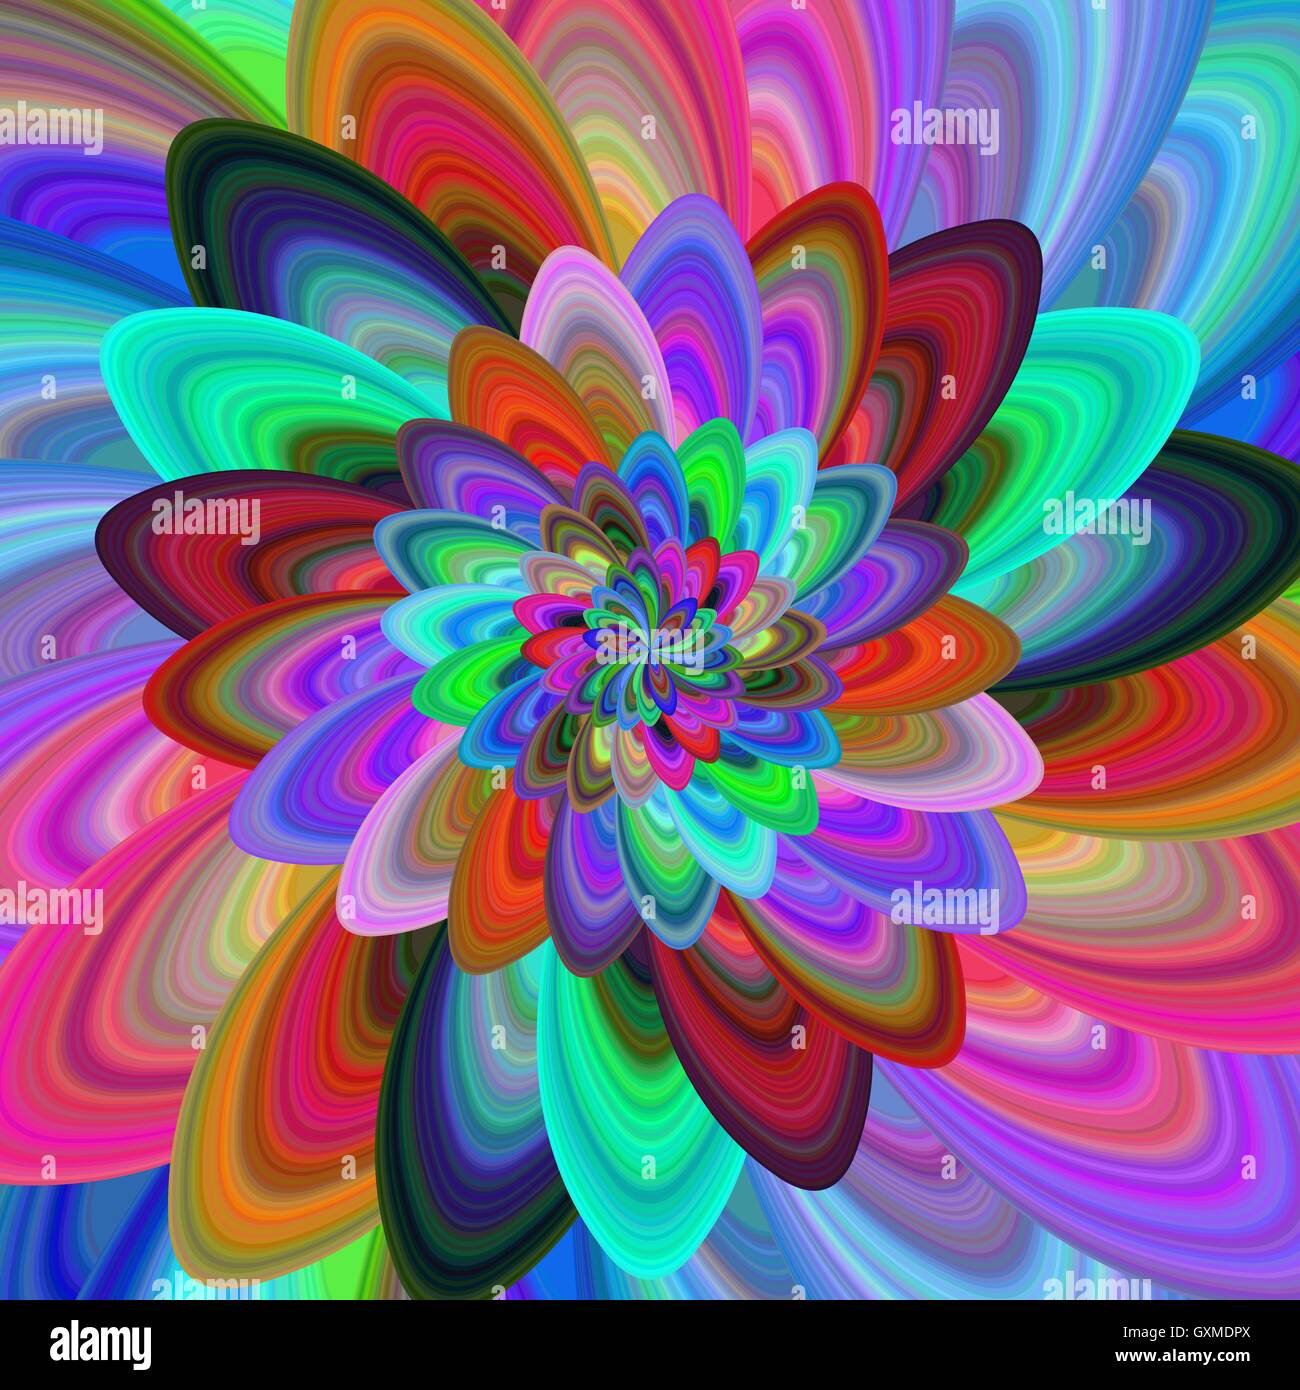 Colorful computer generated fractal background Stock Vector